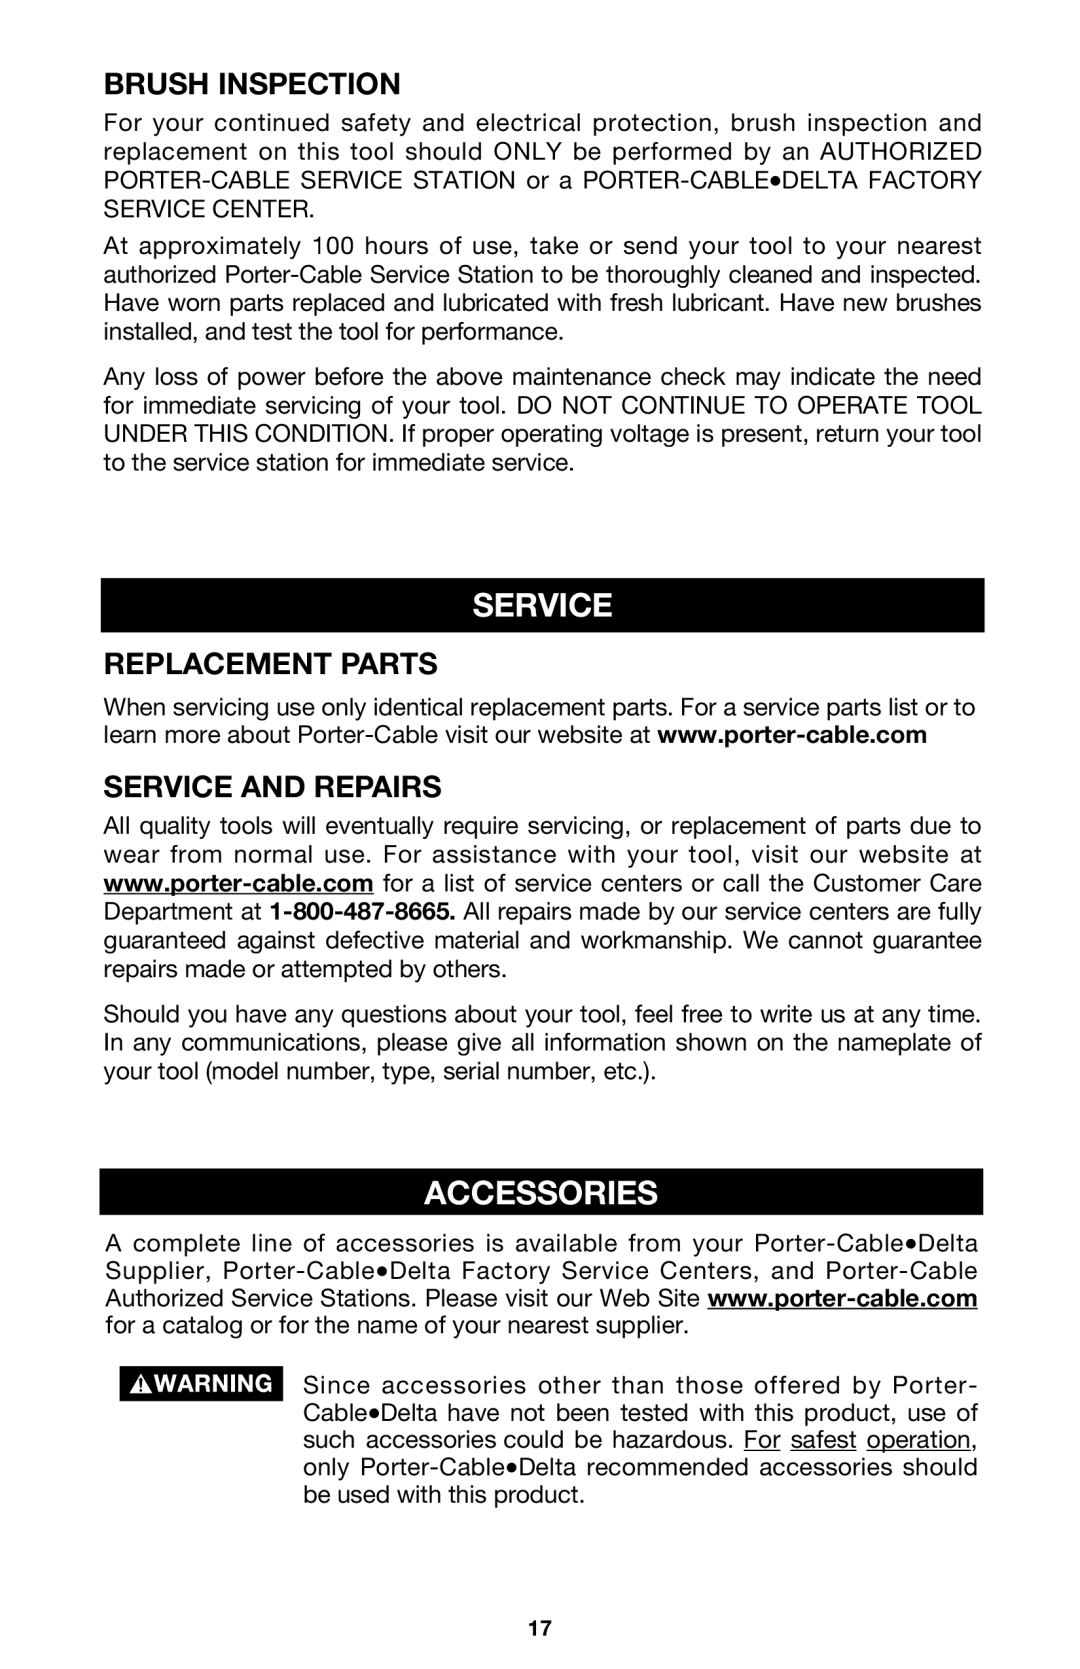 PYLE Audio 314 instruction manual Accessories, Brush Inspection, Replacement Parts, Service And Repairs 